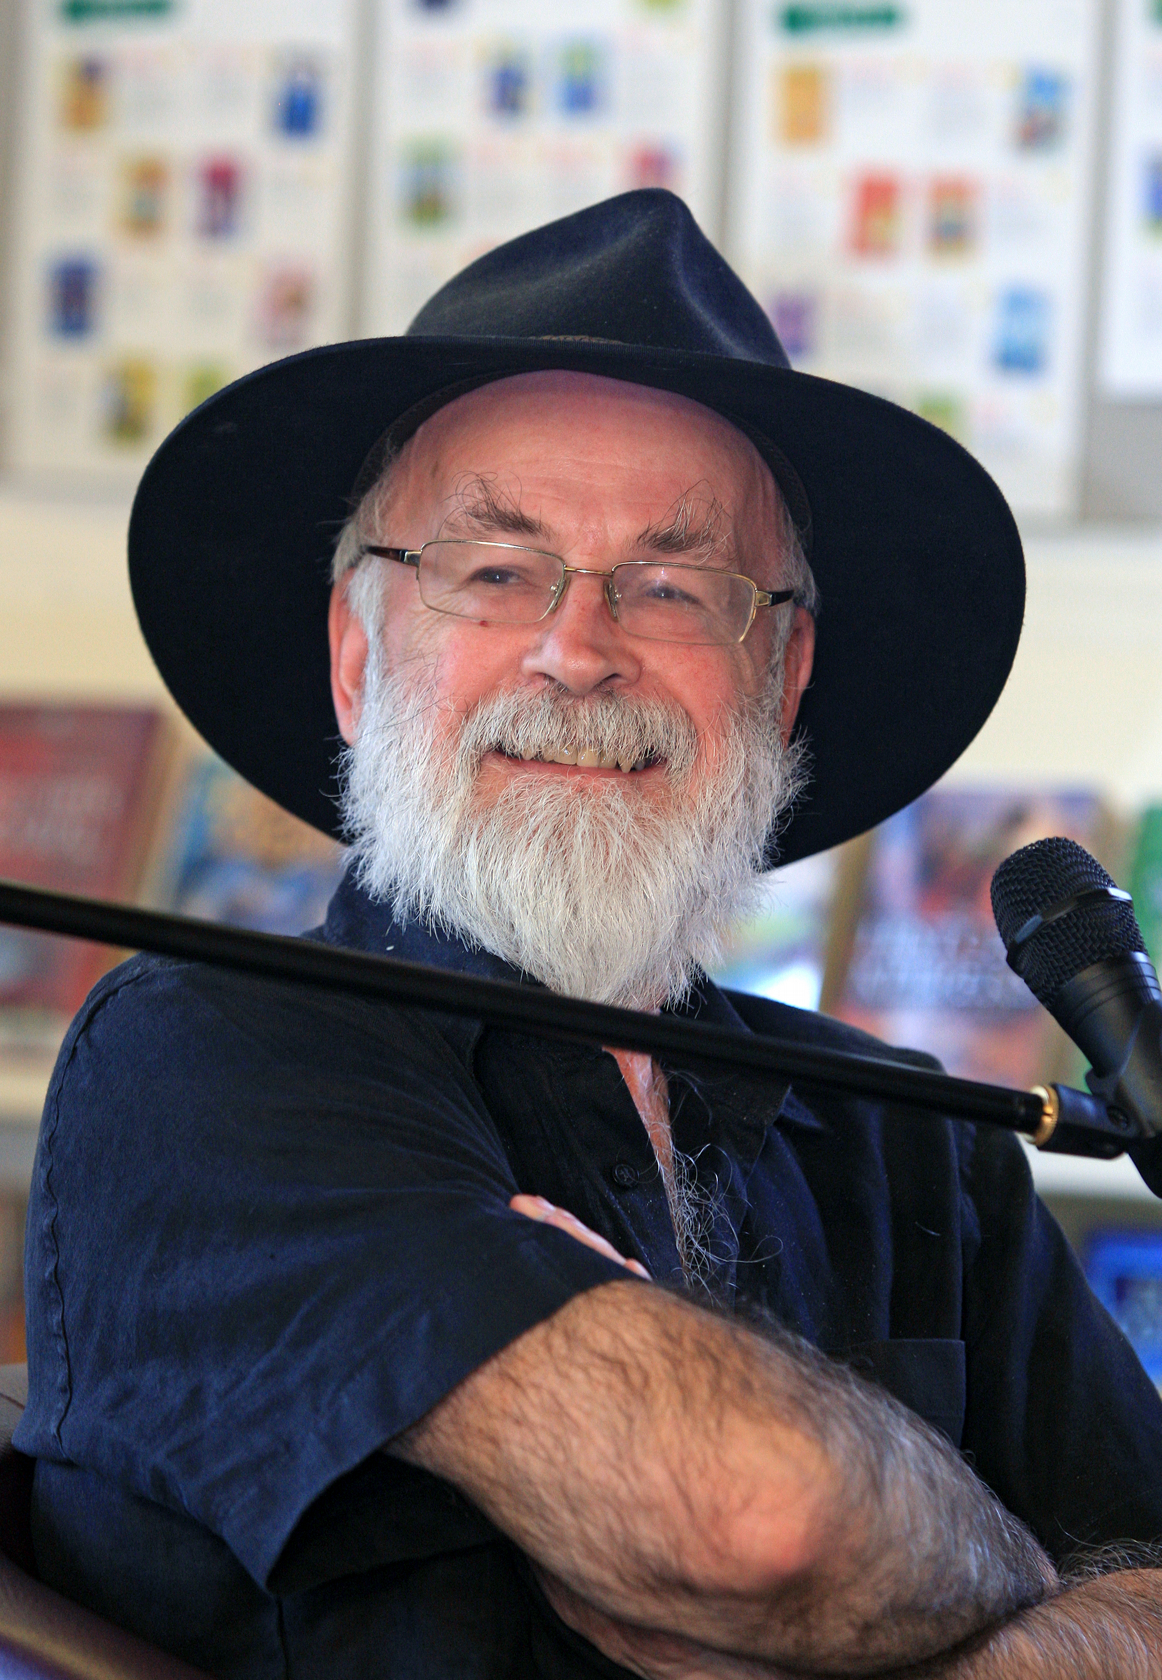 Sir Terry Pratchett set to be honoured with commemorative plaque at Beaconsfield Library - Bucks Free Press